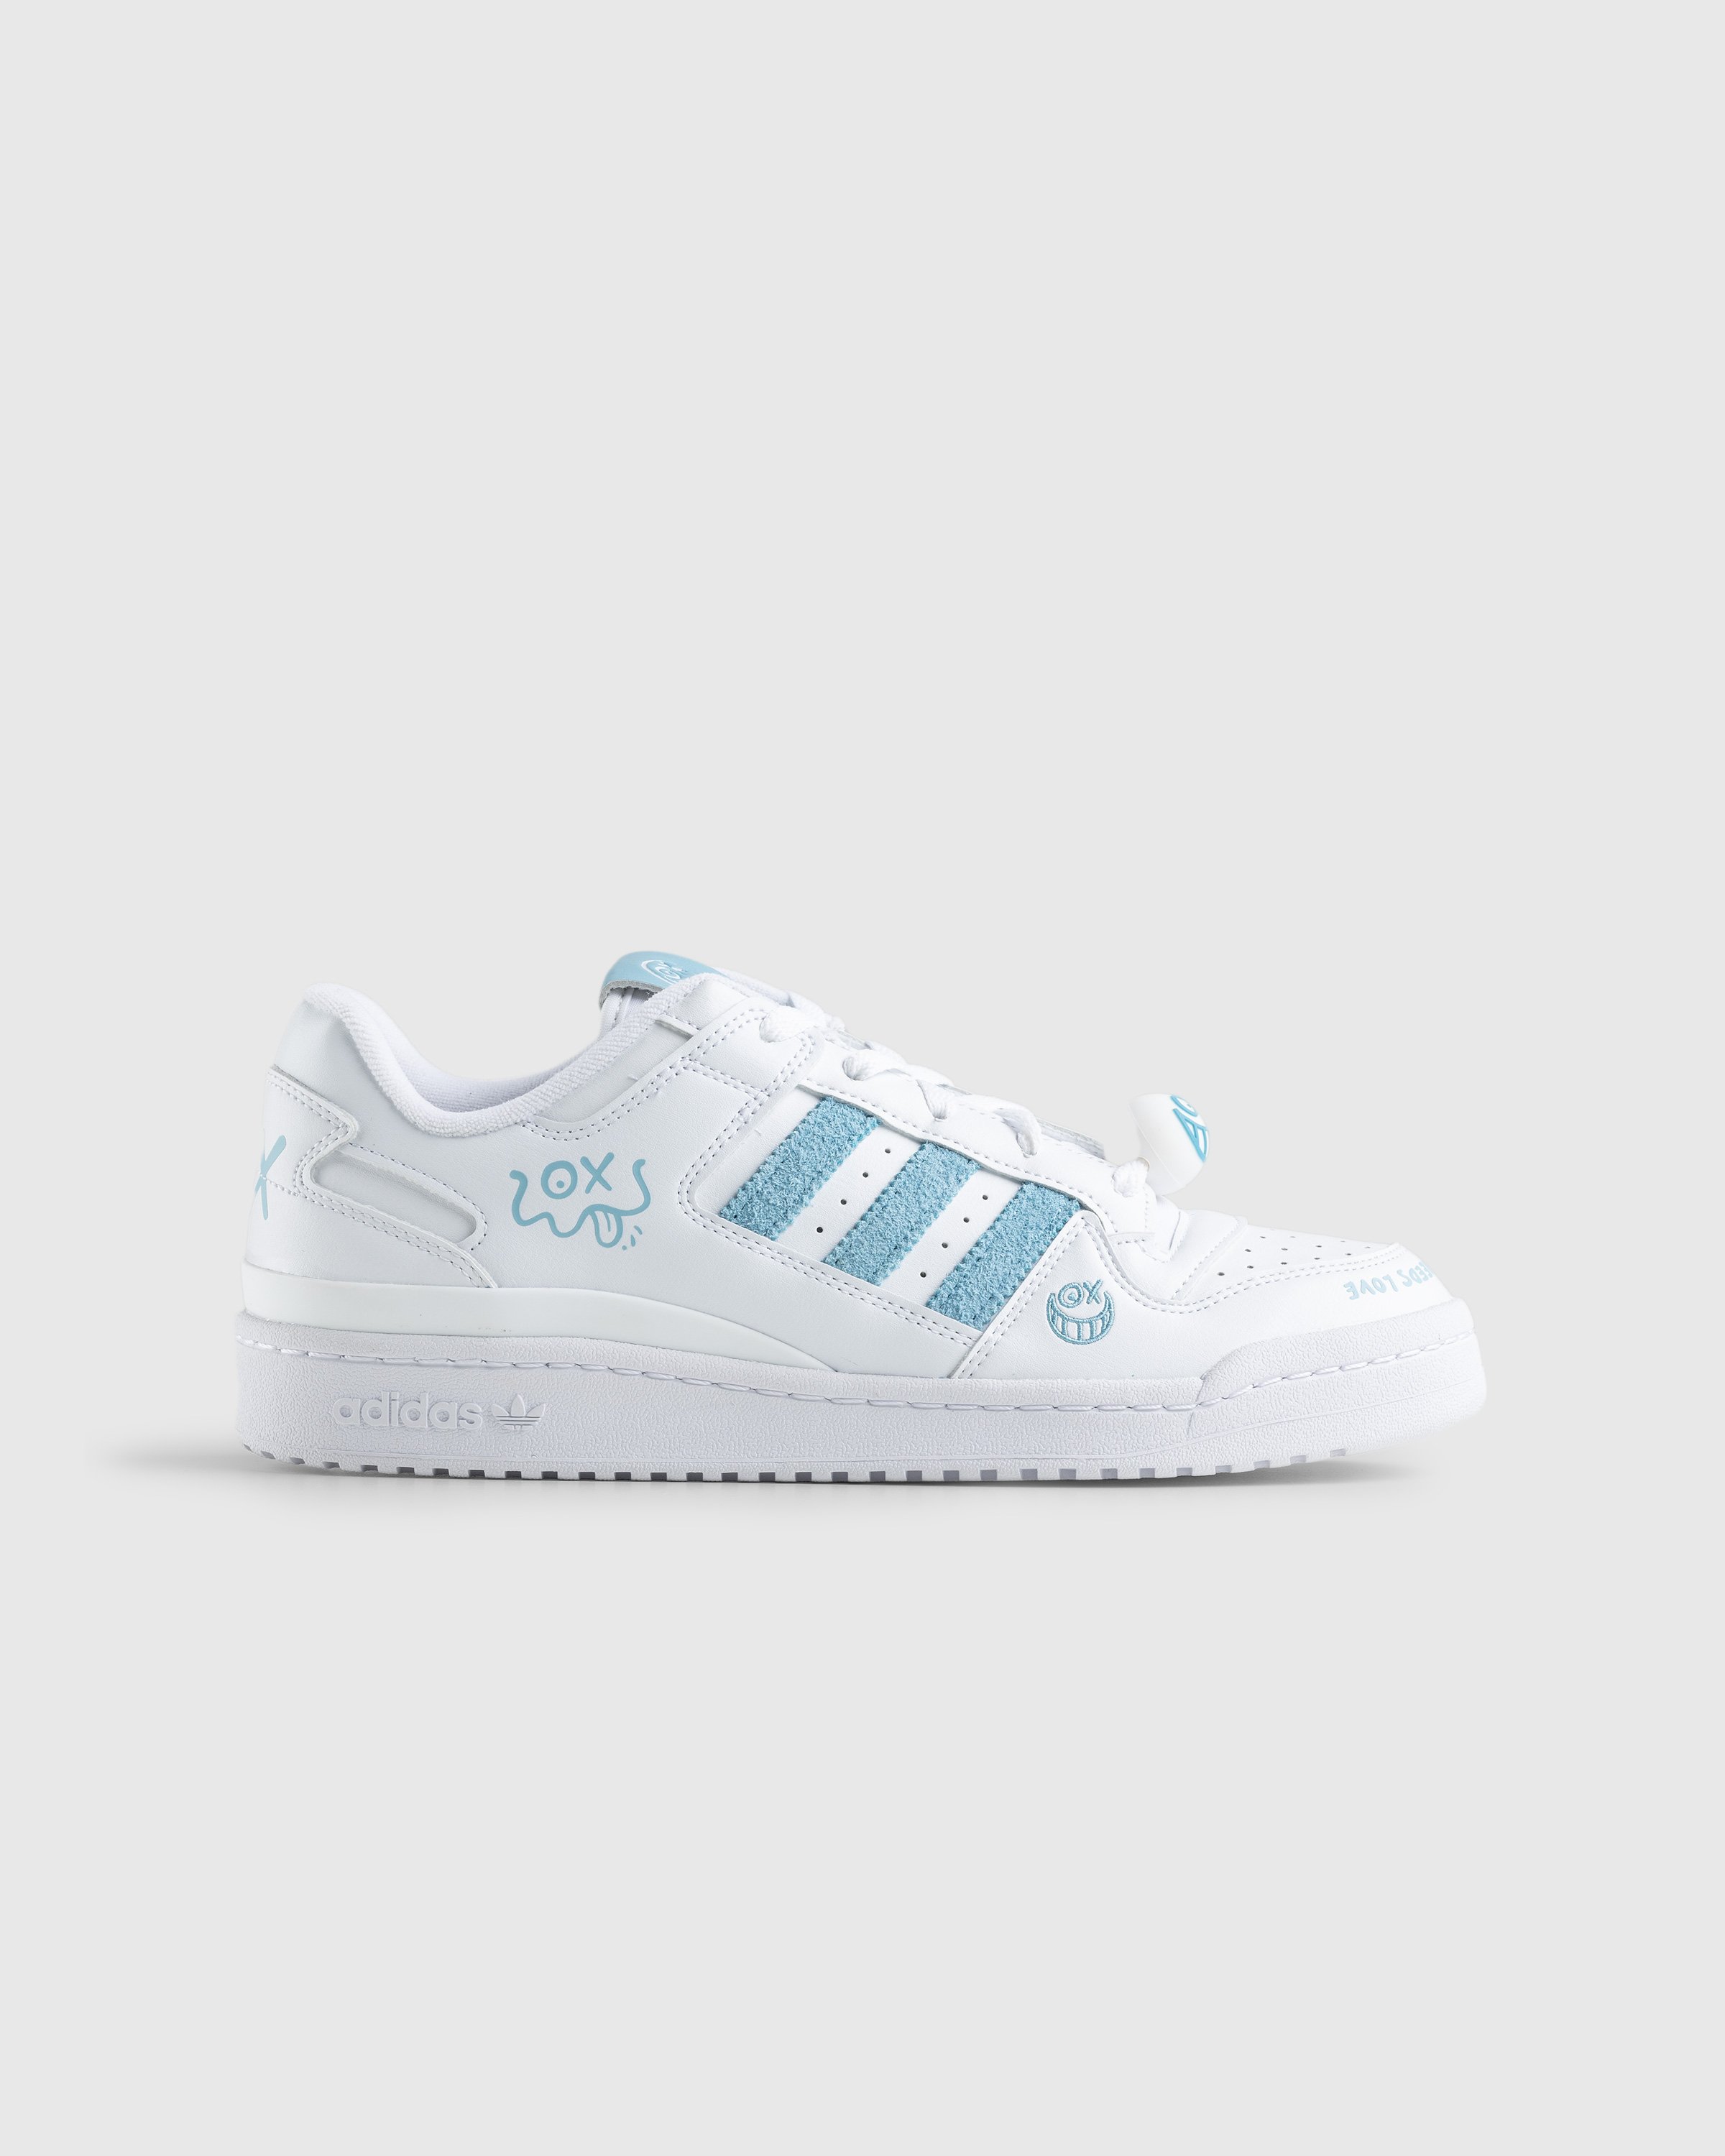 Adidas - André Saraiva Forum Low CL White/Blue - Footwear - White - Image 1